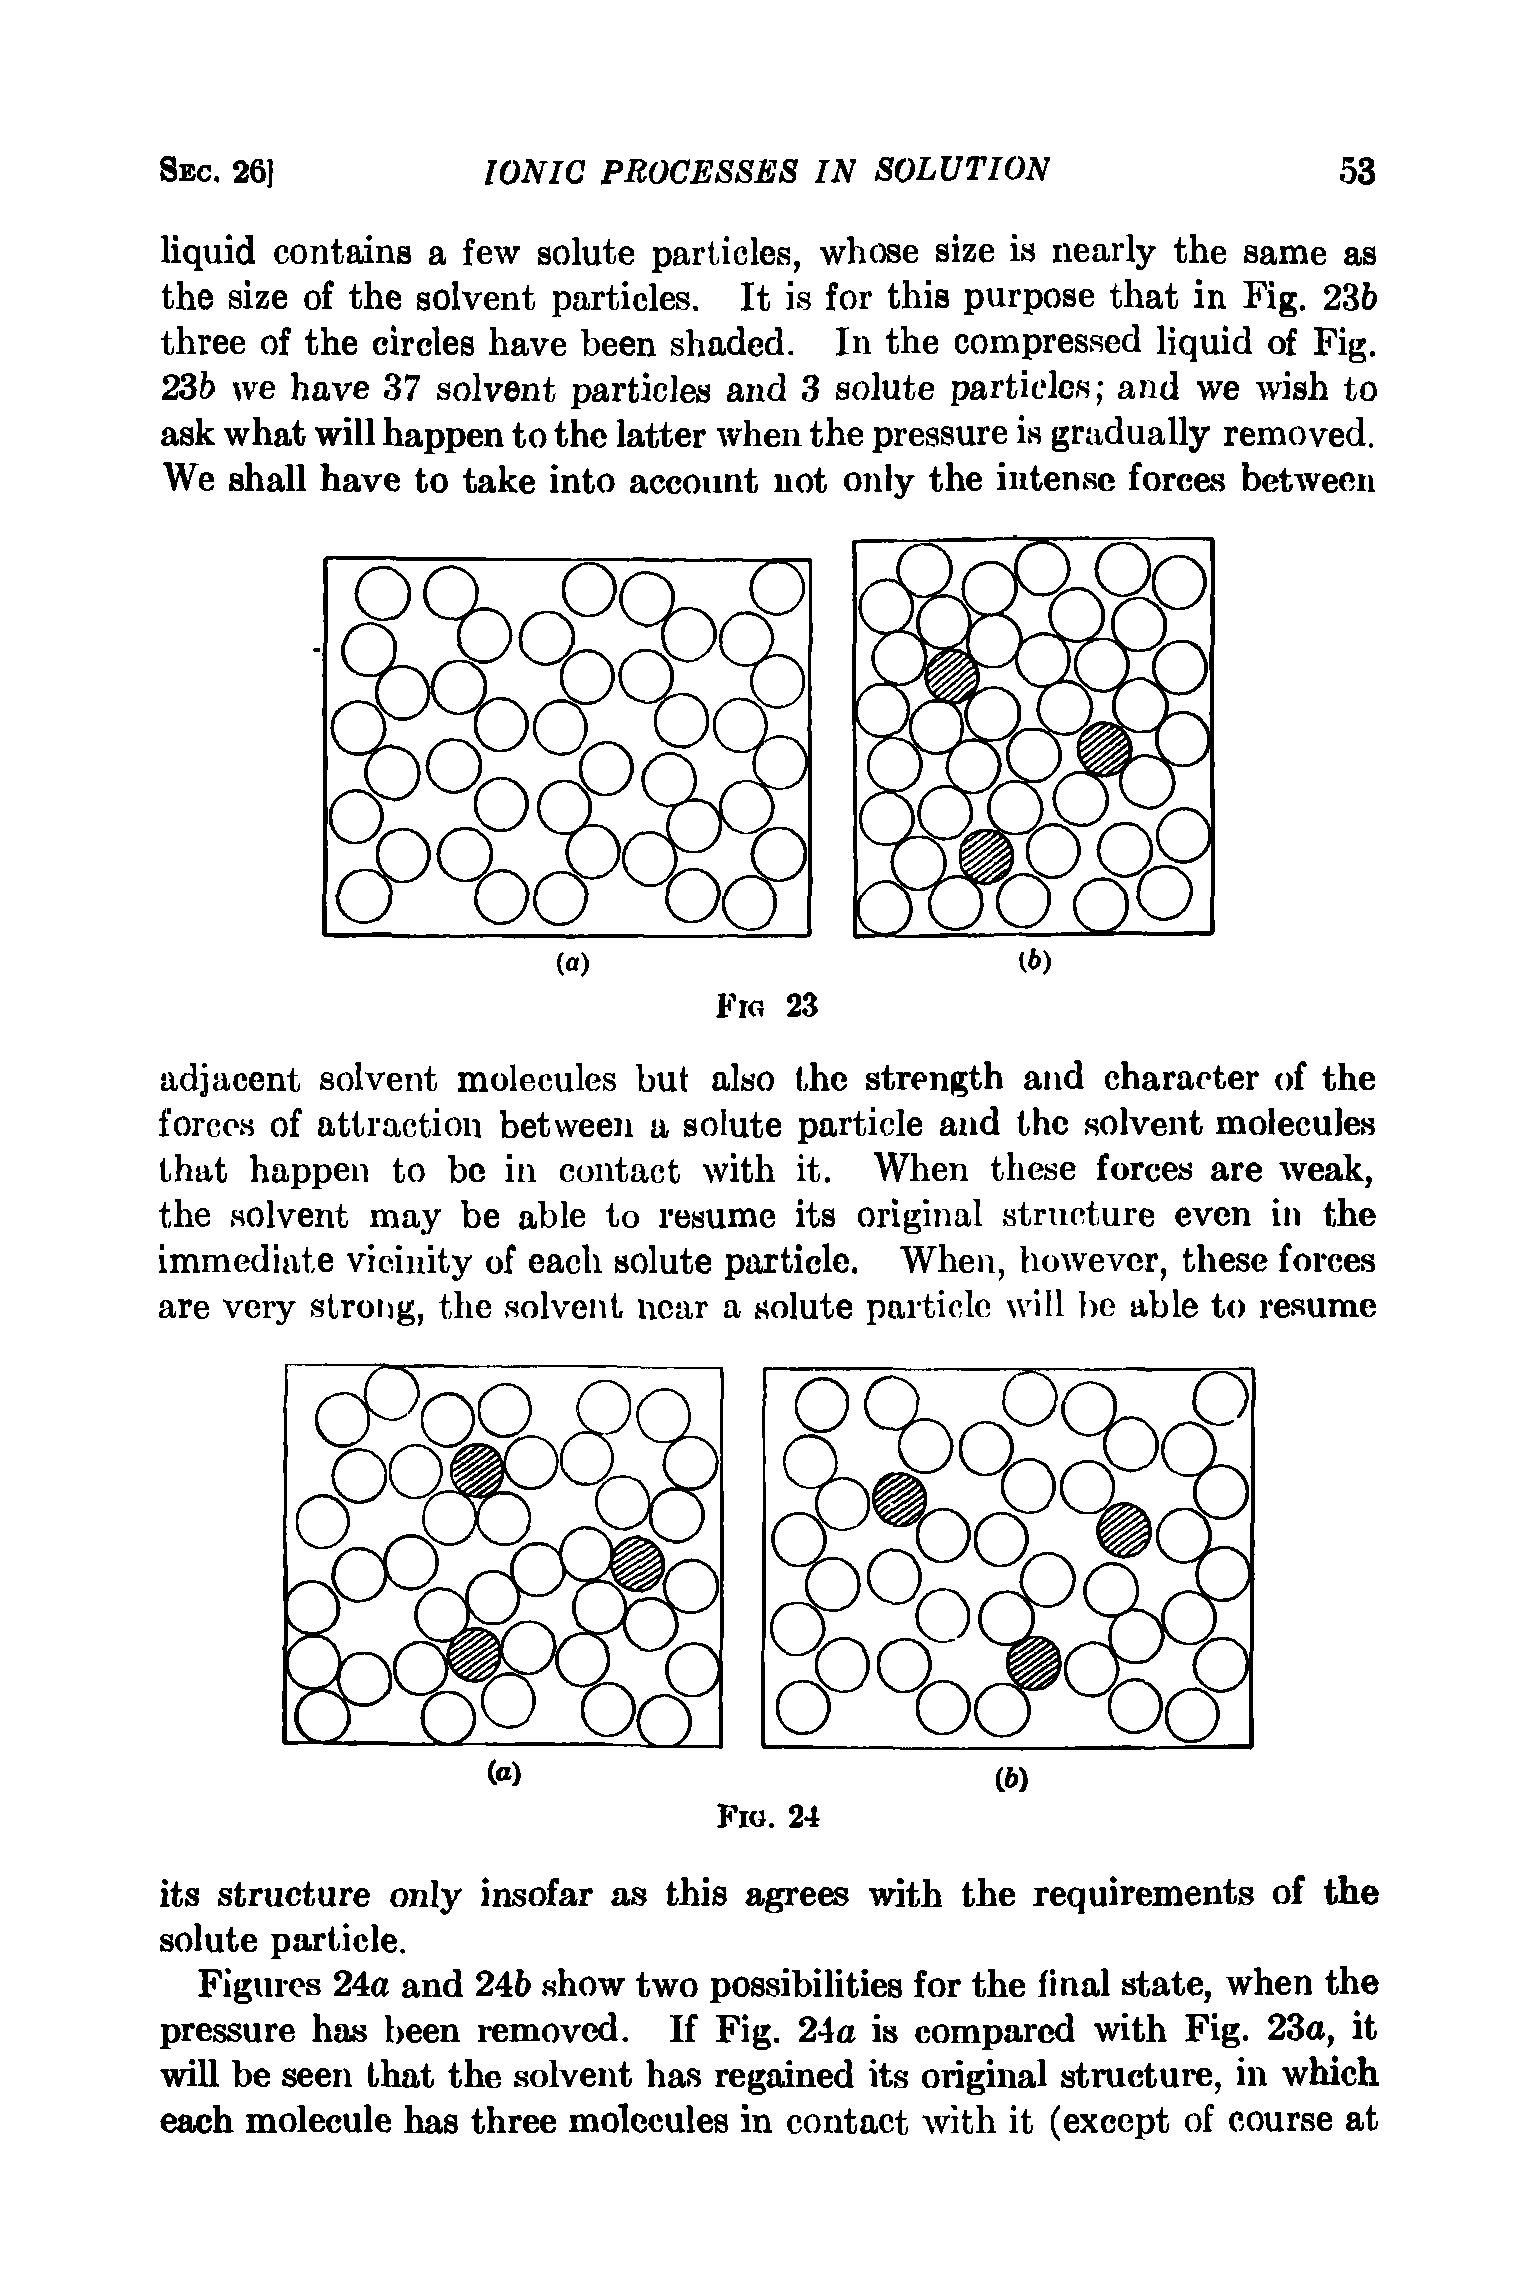 Figures 24a and 24b show two possibilities for the final state, when the pressure has been removed. If Fig. 24a is compared with Fig. 23a, it will be seen that the solvent has regained its original structure, in which each molecule has three molecules in contact with it (except of course at...